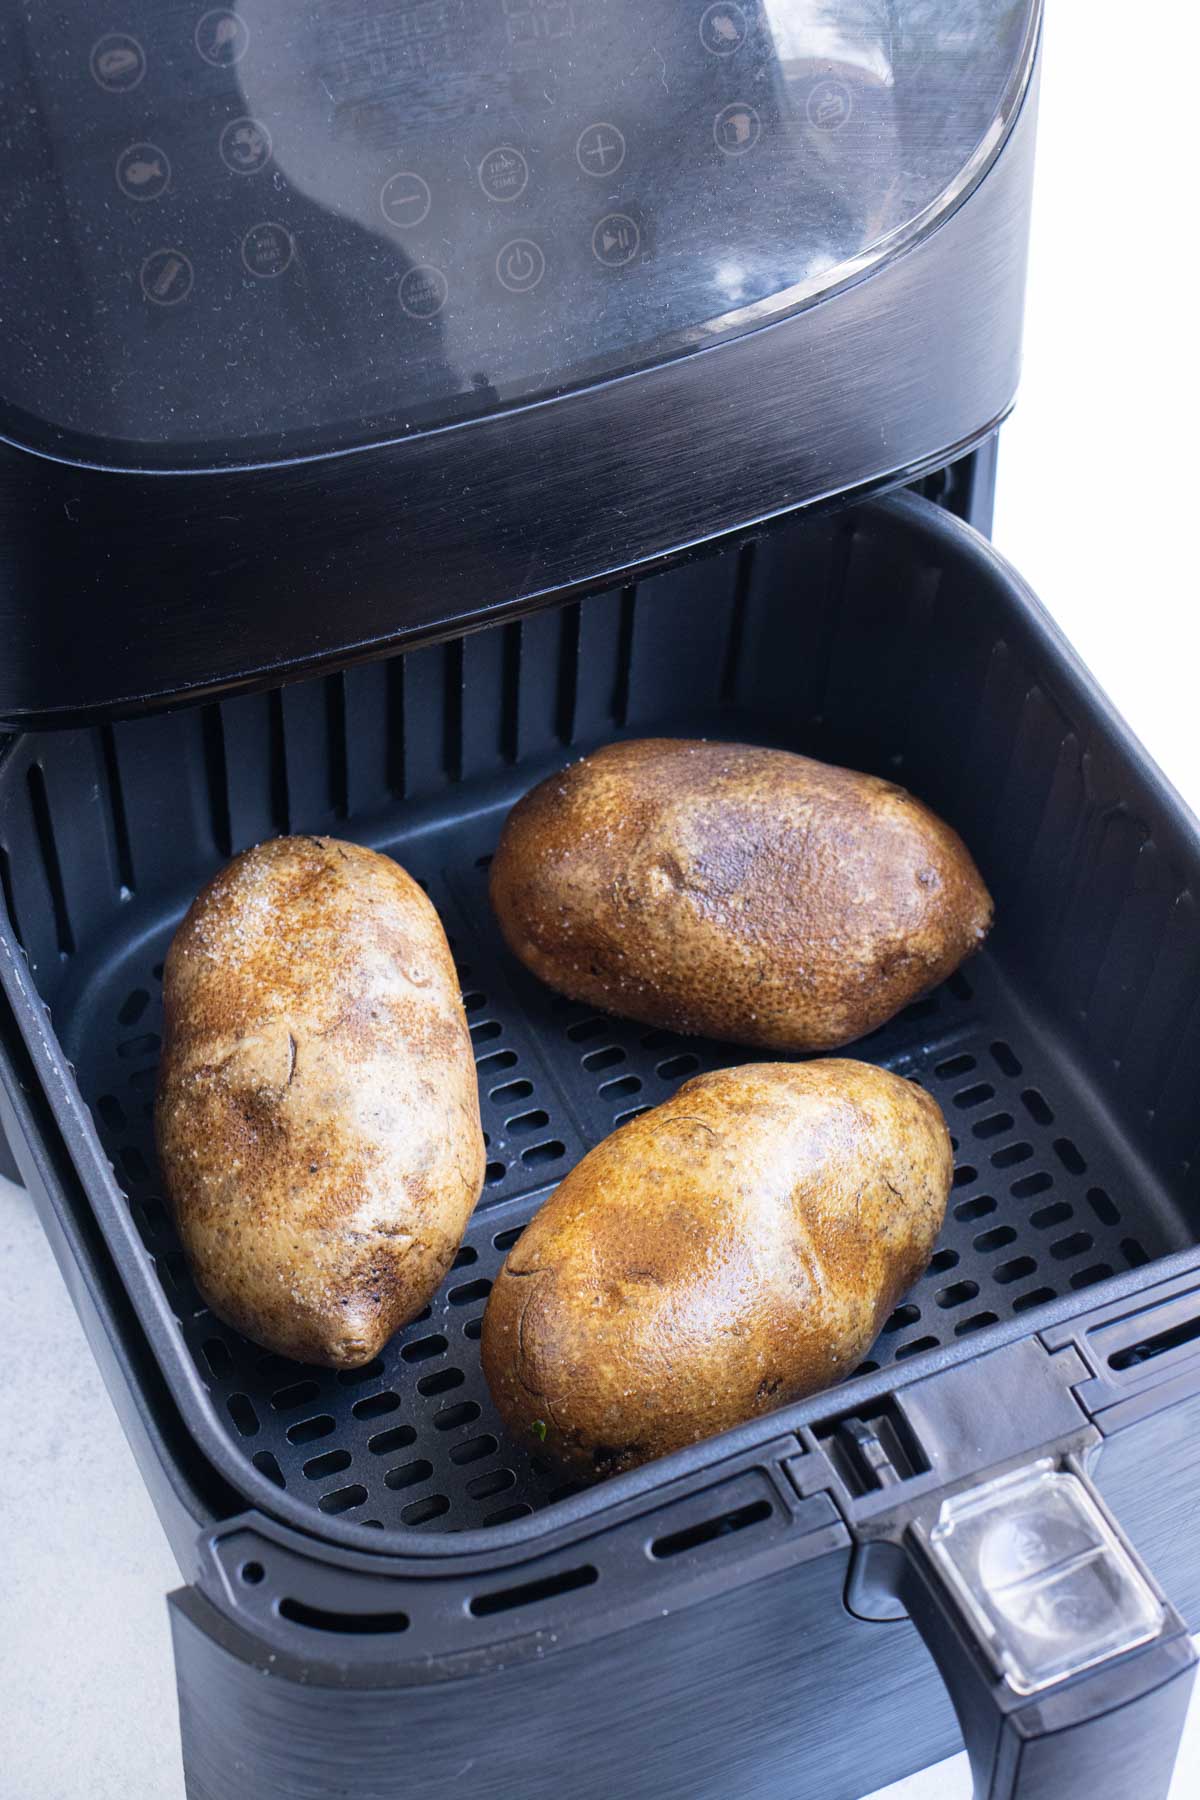 Place potatoes in an air fryer in a single layer.